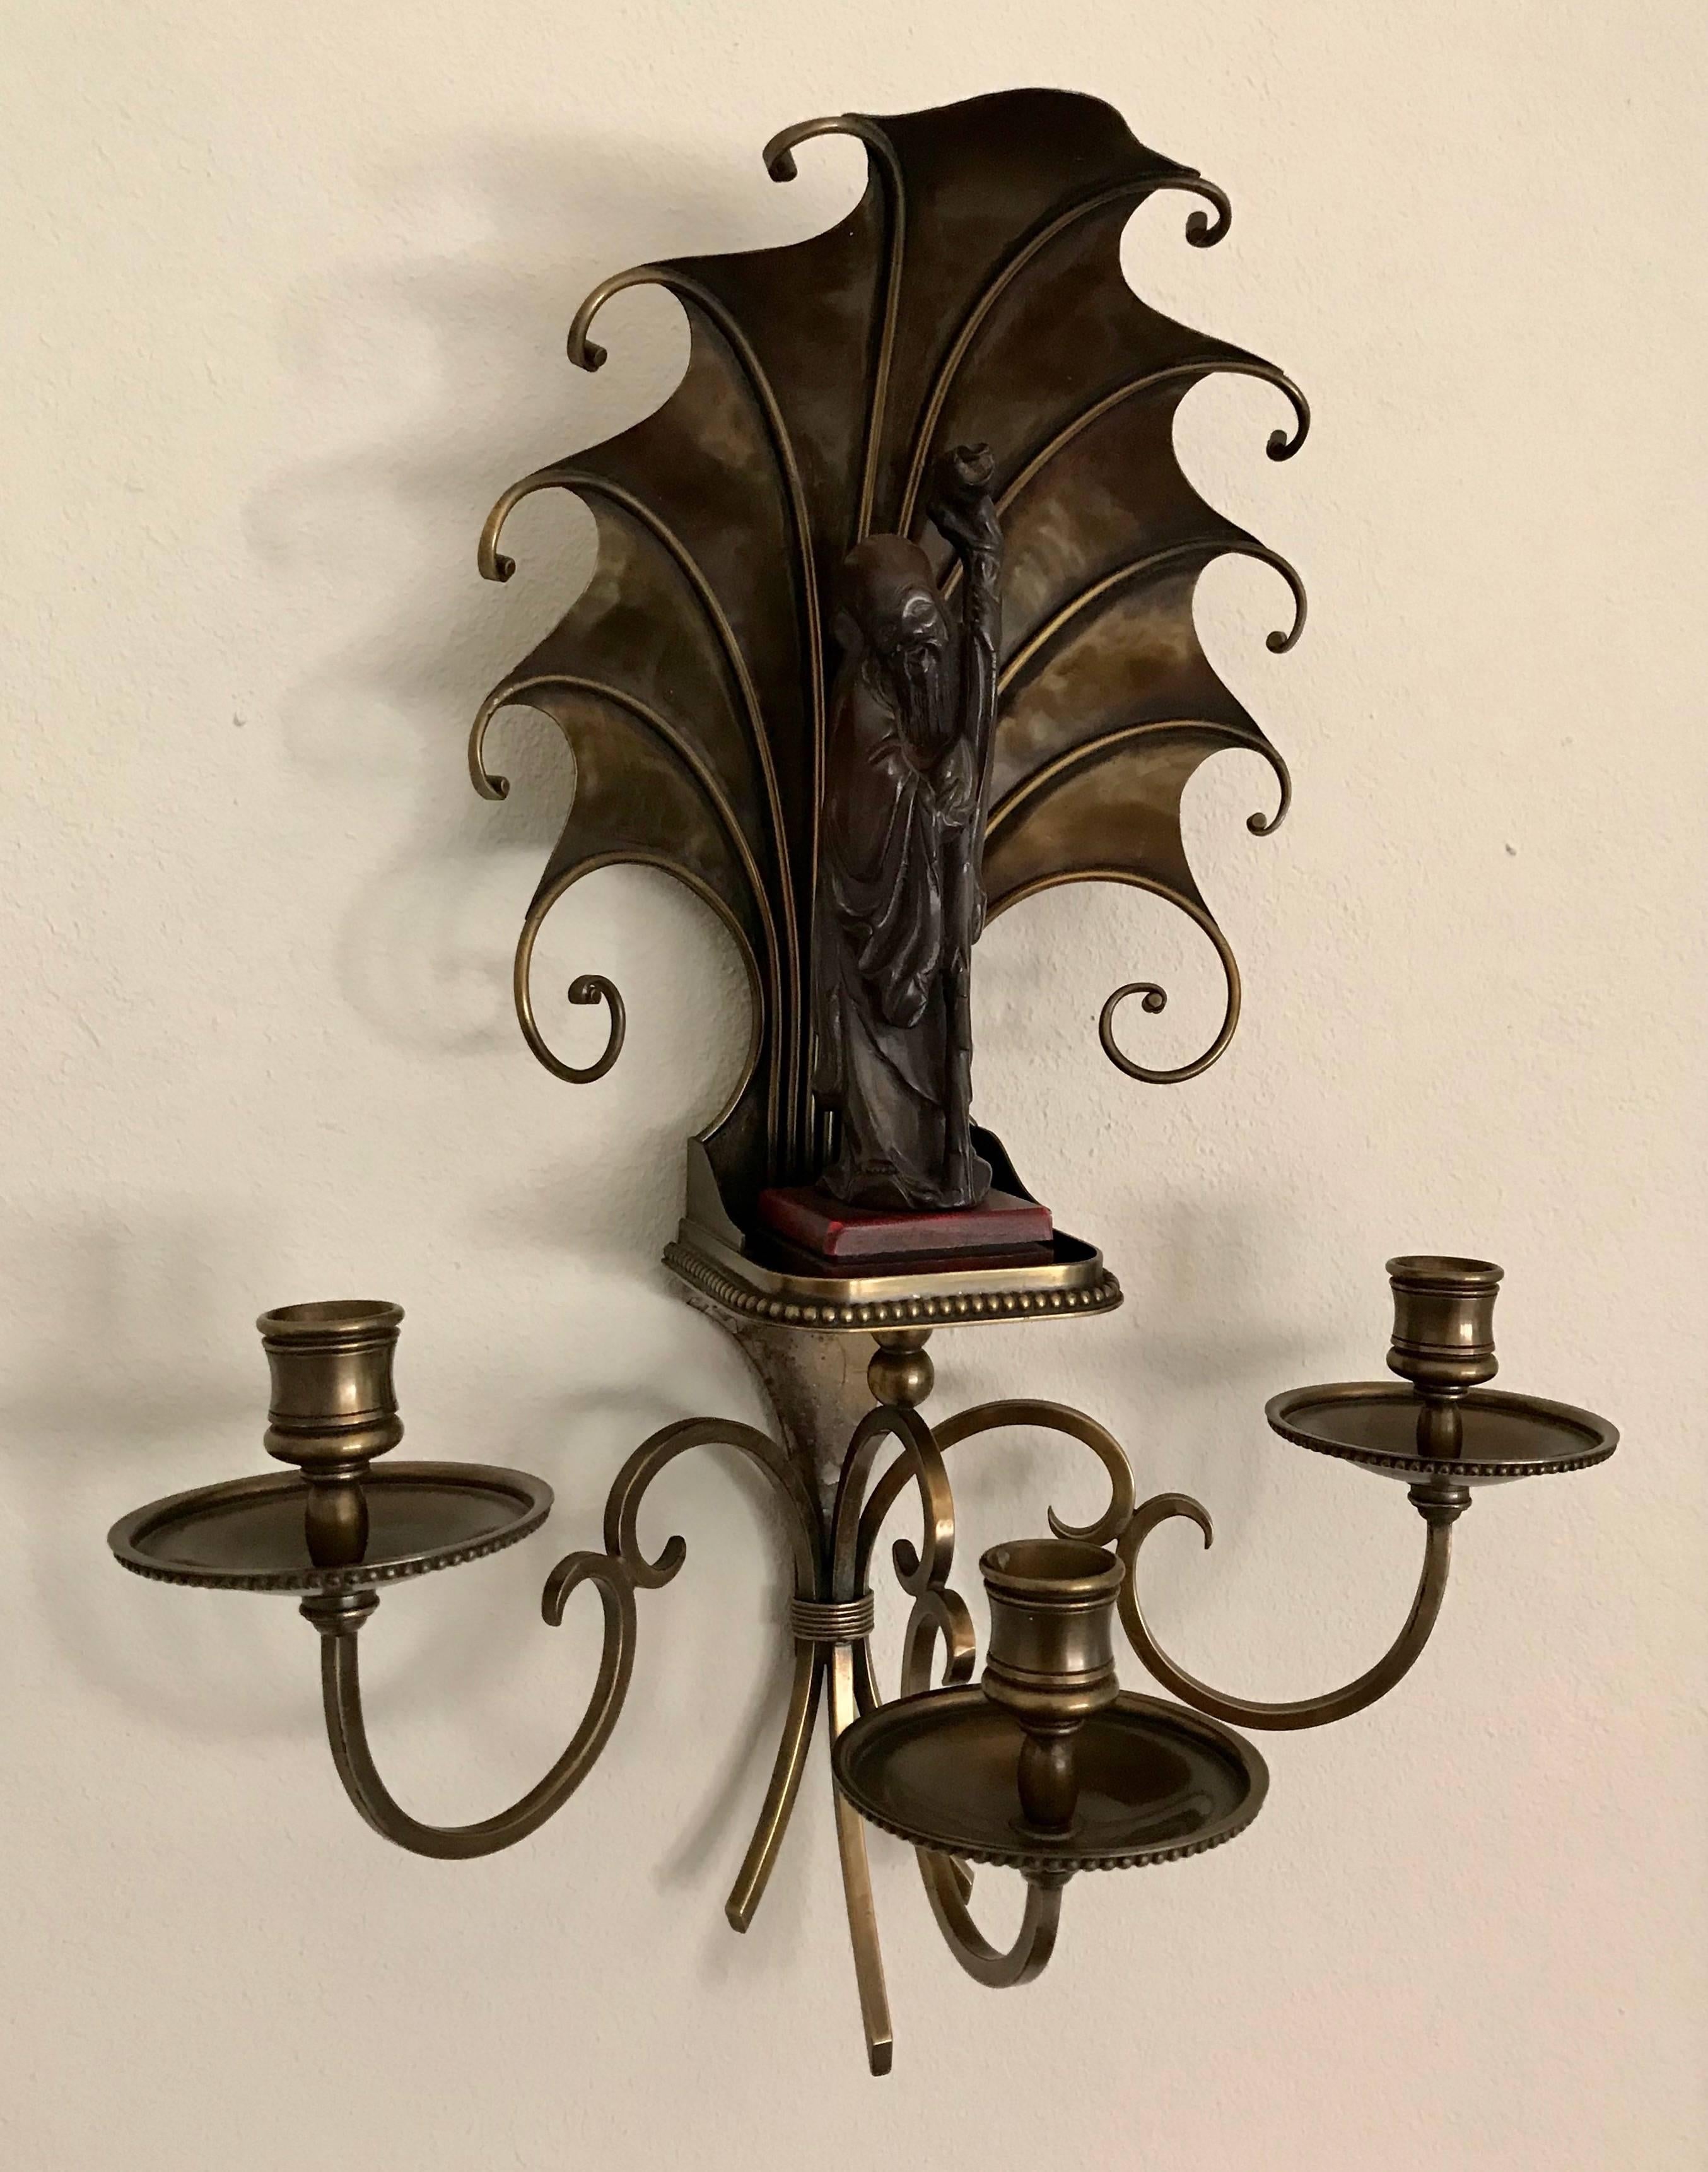 Pair of very unique Art Deco style handcrafted bronze or brass wall sconces featuring Shou Xing, Chinese god of longevity, possibly by Maison Jansen. Scalloped hand-hammered brass shell from back enshrines the figurine. Three delicate scrolled